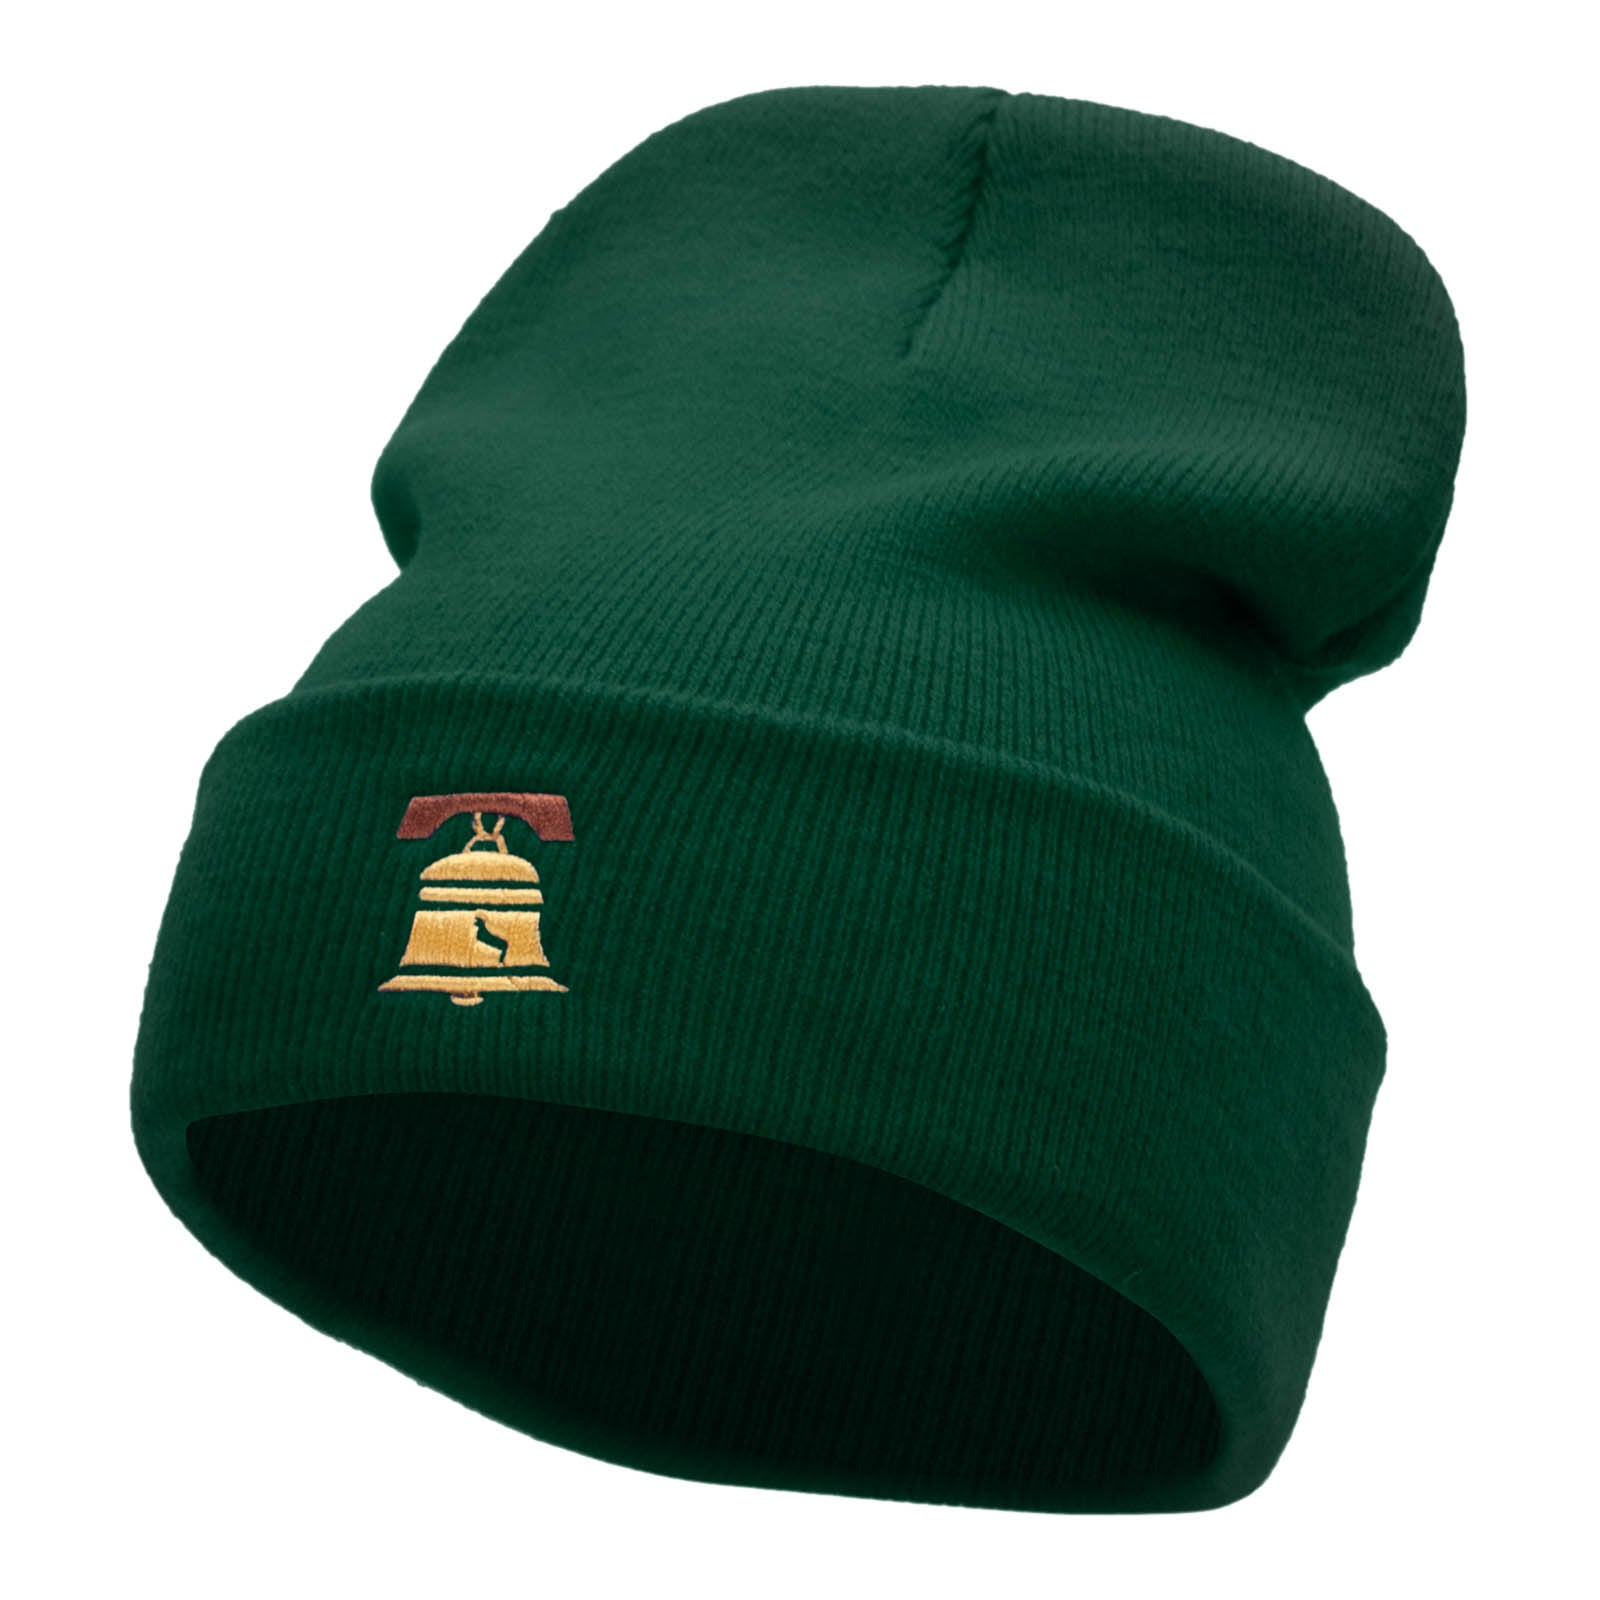 The Liberty Bell Embroidered 12 Inch Long Knitted Beanie - Dk Green OSFM